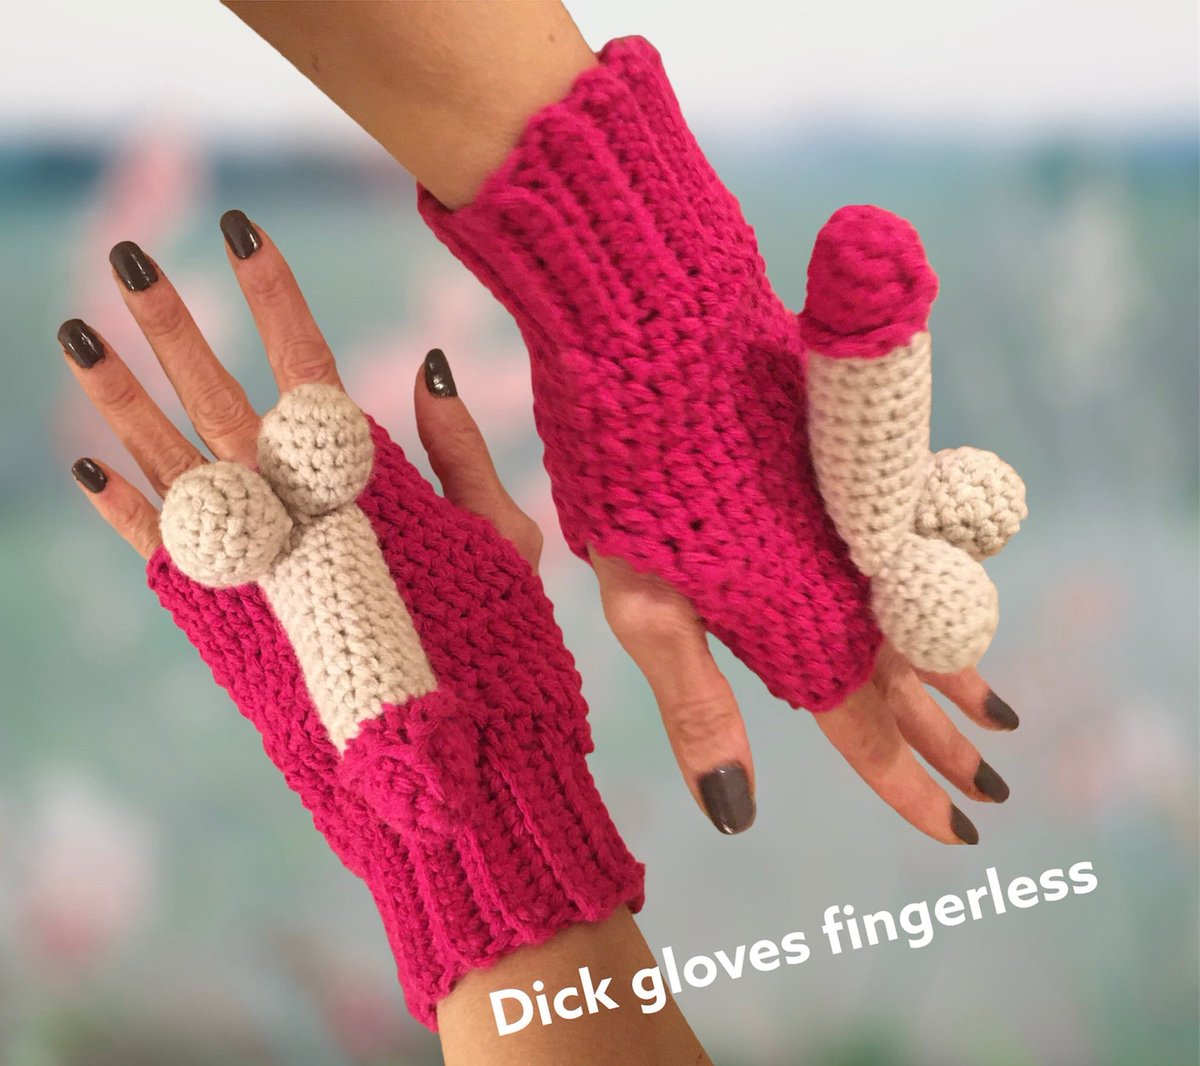 Excited to share the latest addition to my #etsy shop: fingerless, dick gift, Chirtsmas for sale #christmas #green #crochetfingerless #crochetgloves #crochetdickgloves #dickfingerless #knitglovesformen #fingerlessgloves #crochetdick etsy.me/3OMfOVa